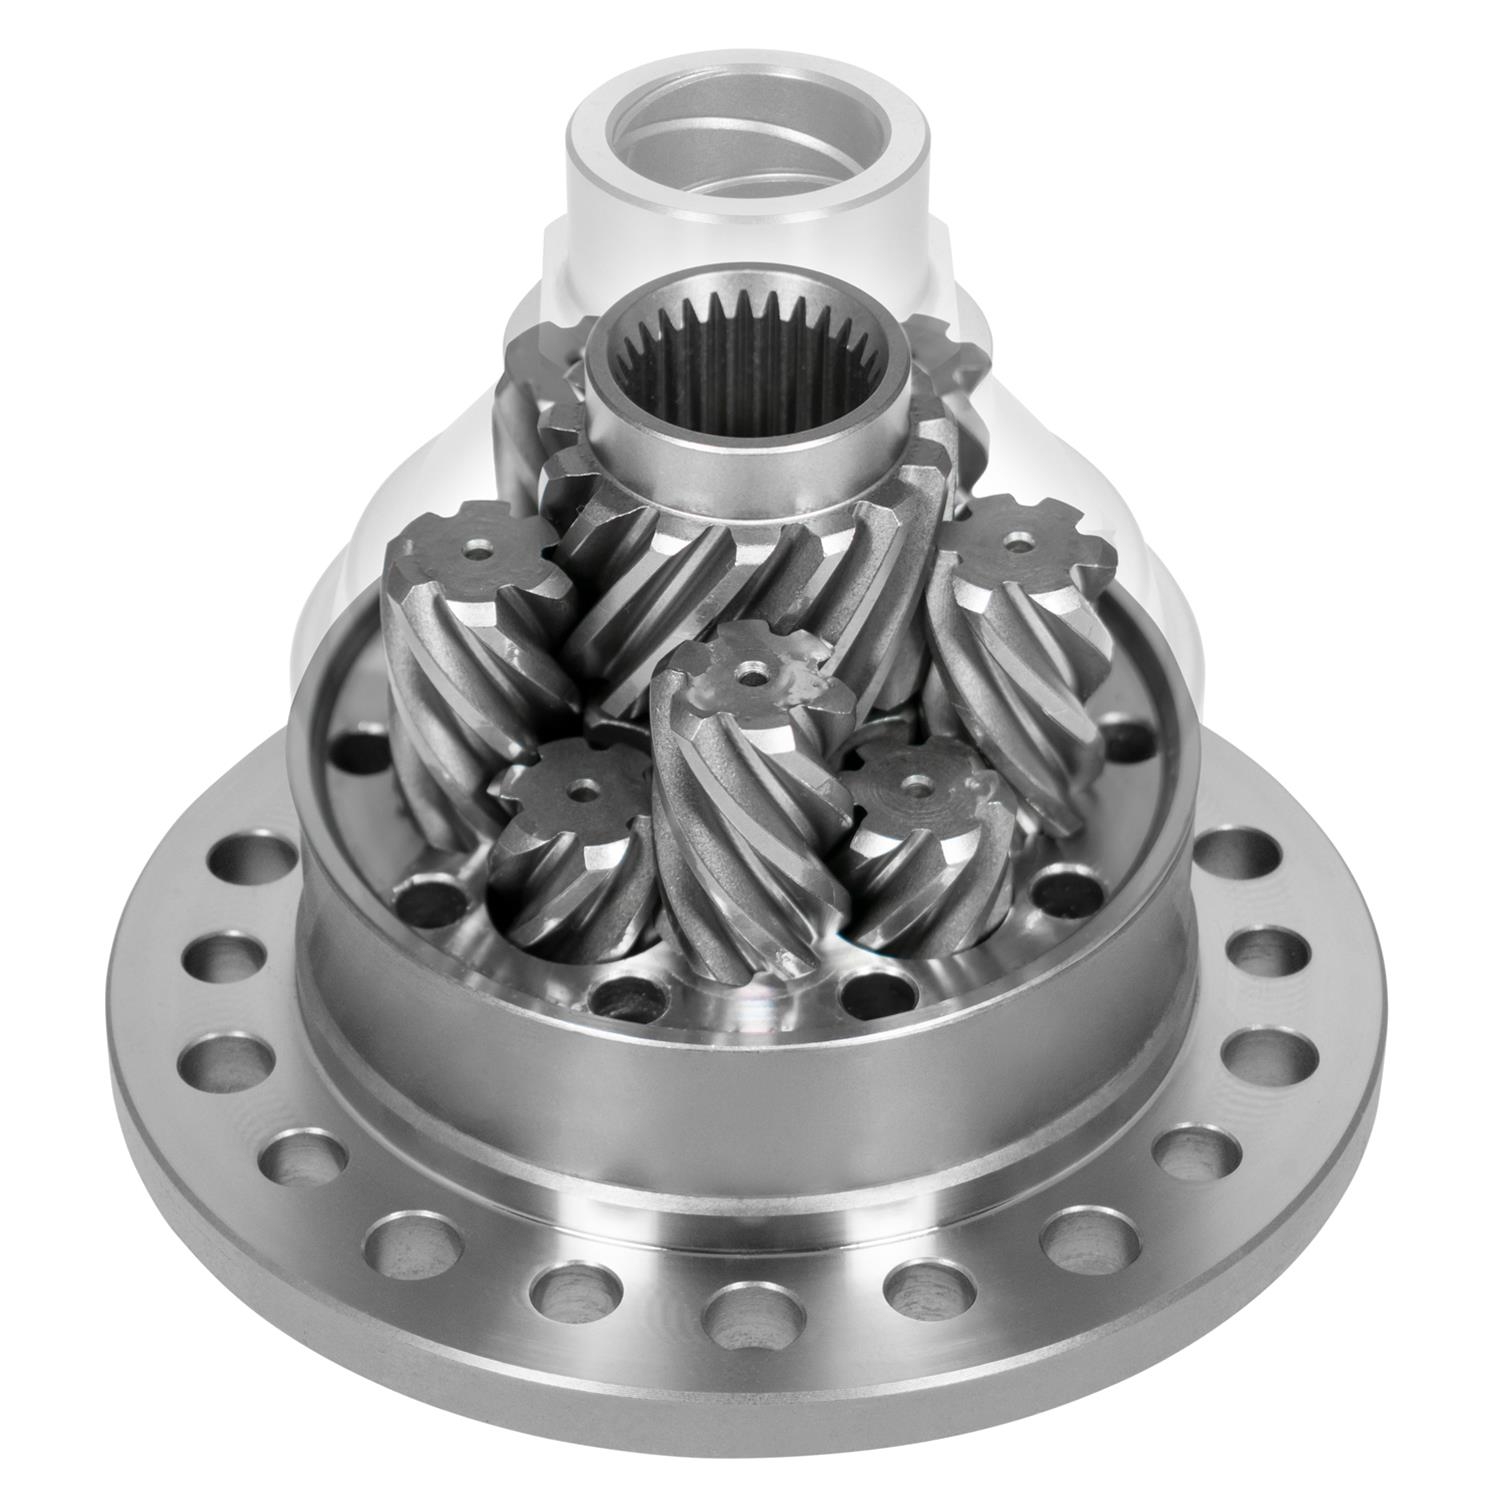 Spartan Helical Worm Gear Limited Slip Differential For Dana 30 Front (27 Spline, 3.73 & Up Ratio)